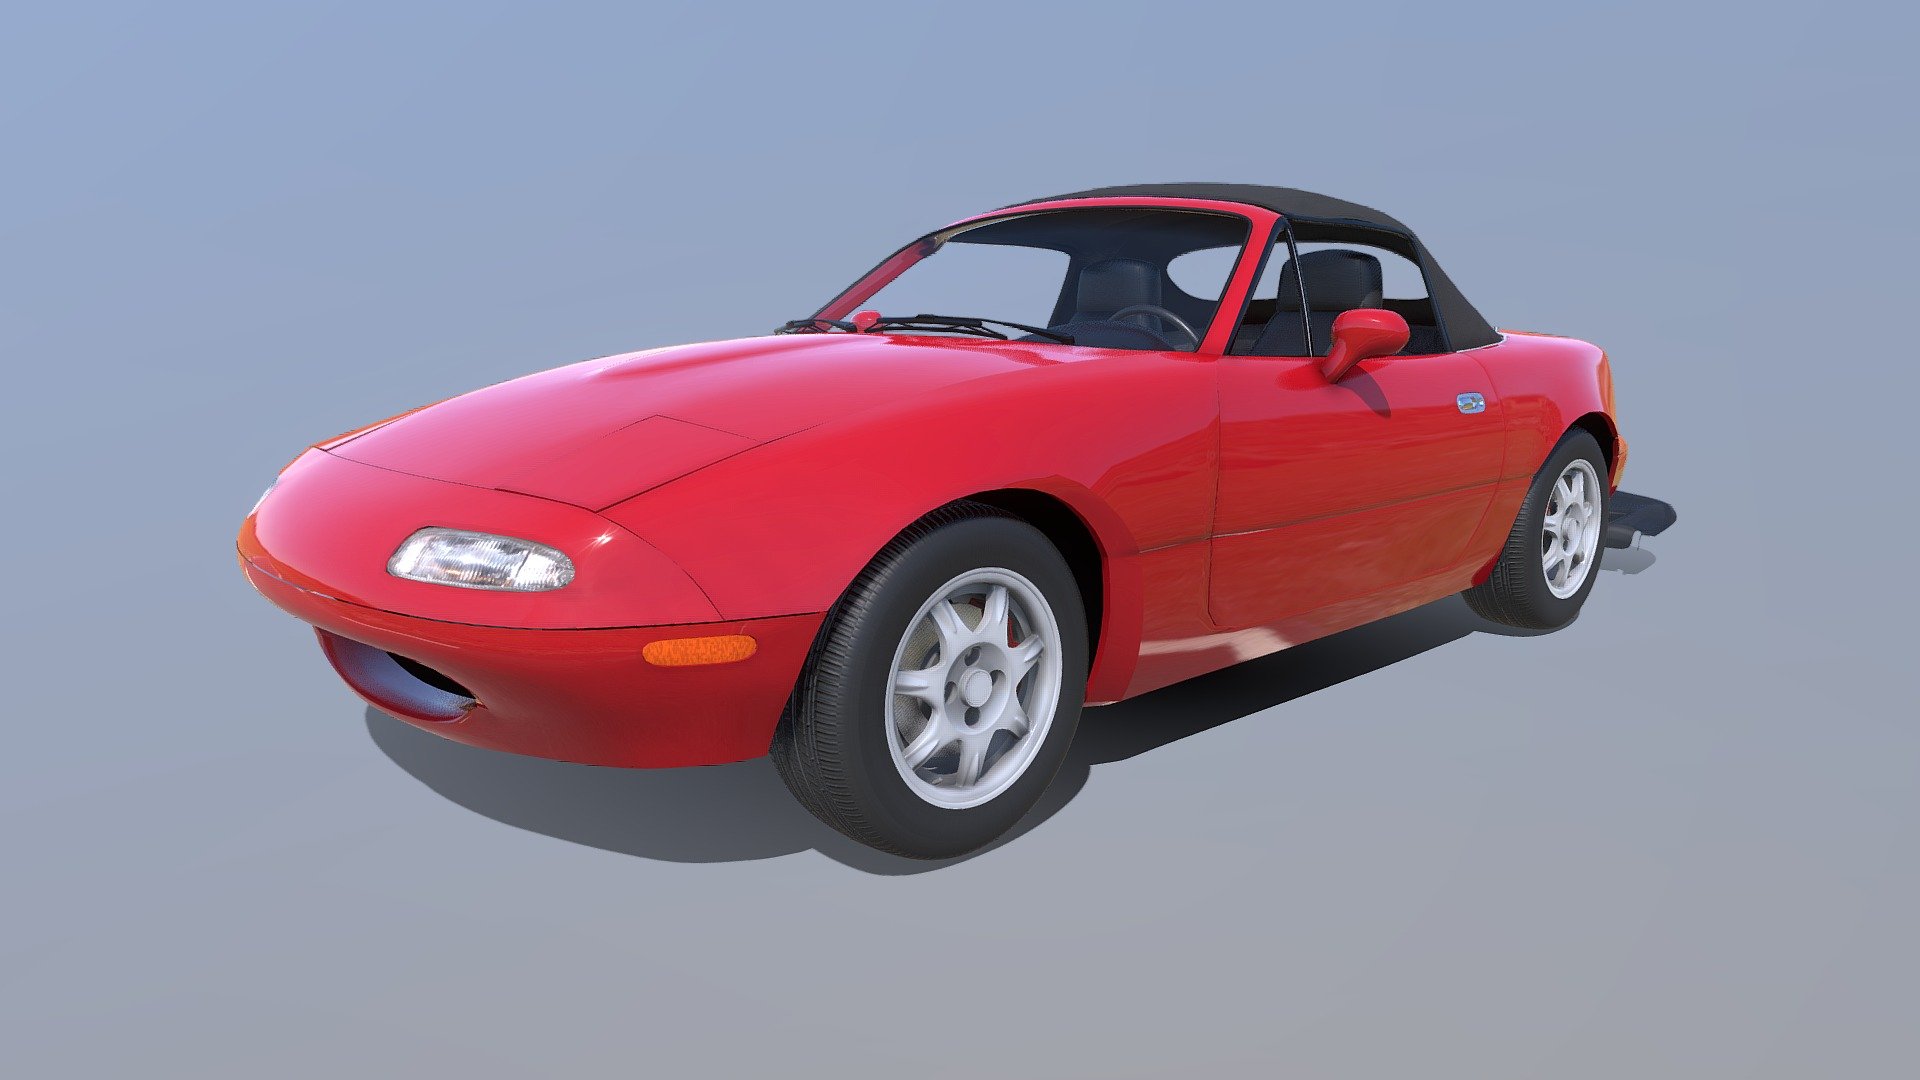 This car is named Miata MX5 - Mazda.
Modeled by me using Blender.
Extensions are in .blend, .obj, .fbx.
Textures are in 2k 3d model